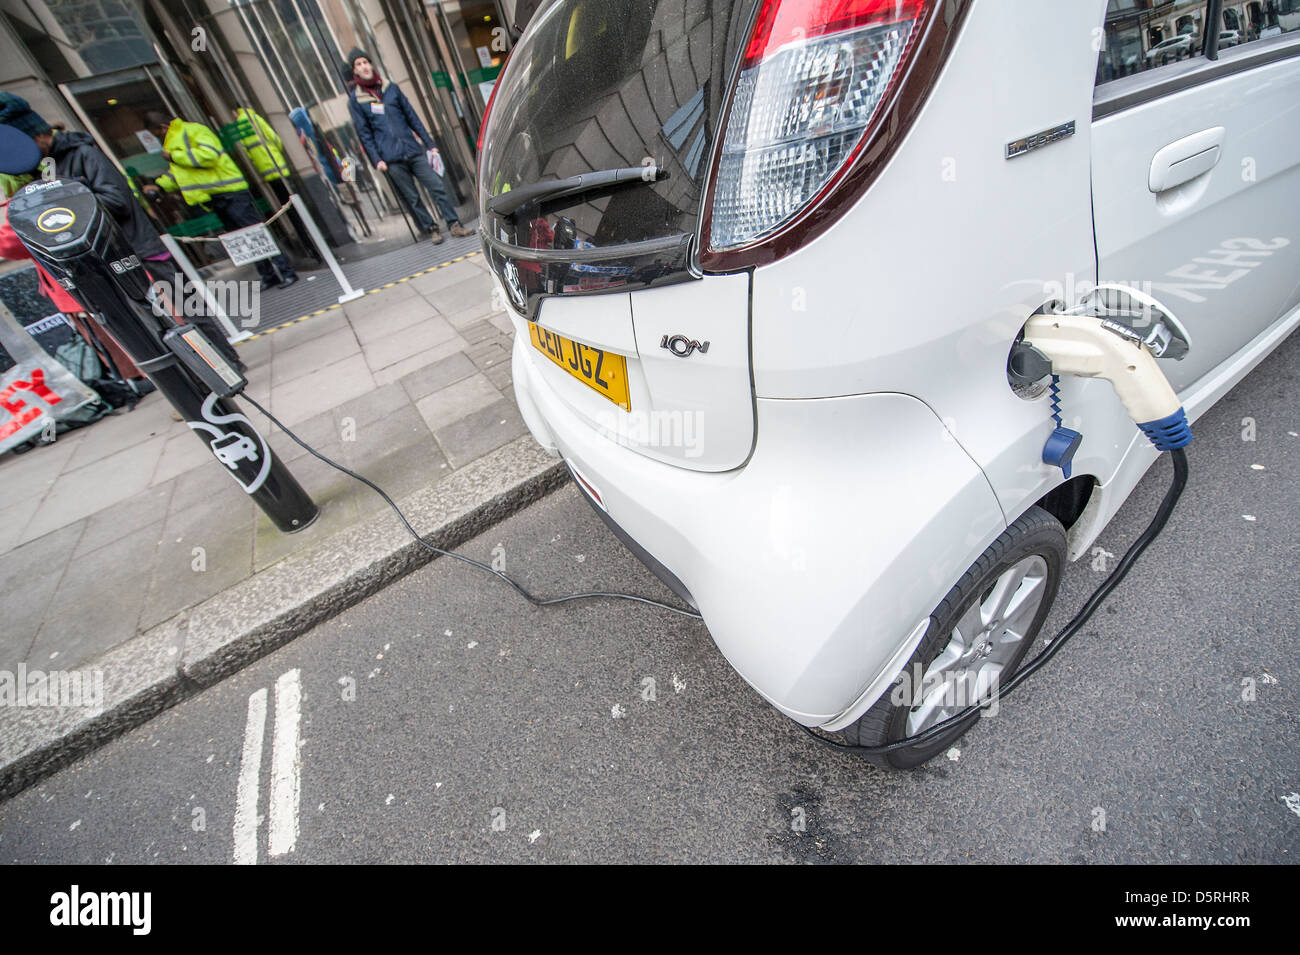 An electric car is charged outside the Department for Transport.  An anti road protest goes on in the background. Stock Photo